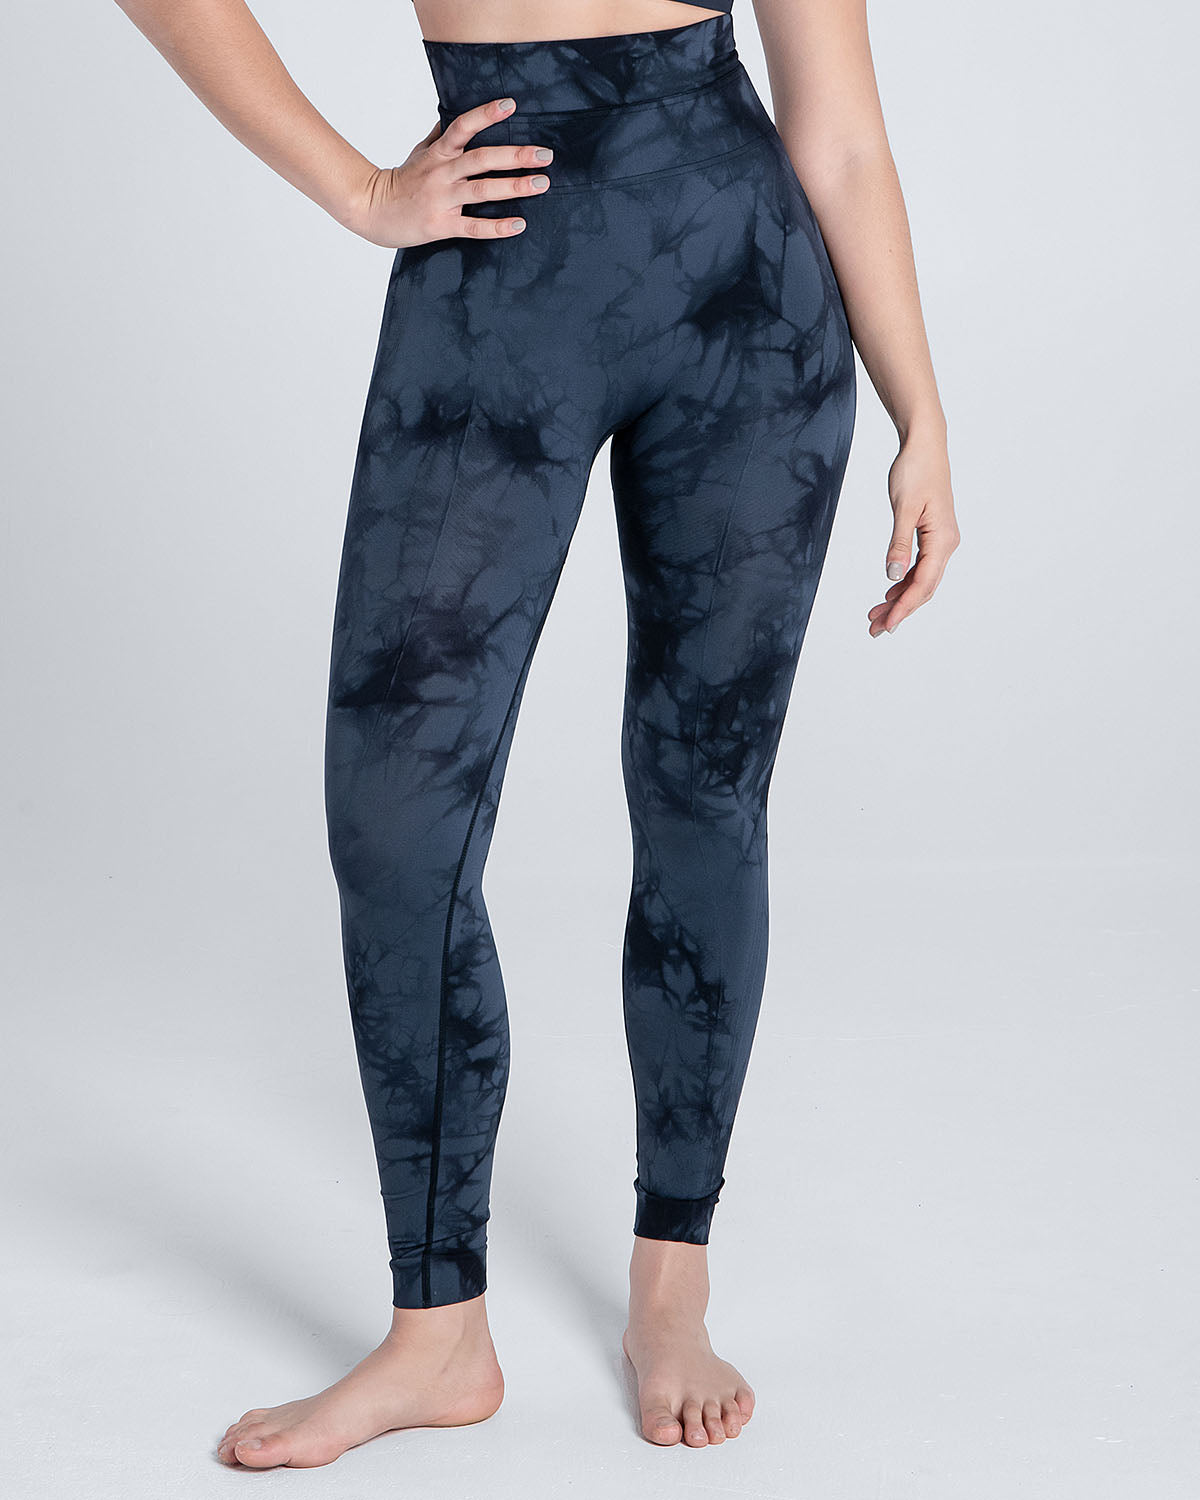 Performance Active Crossover Leggings With Pockets Tie-dye Pattern High  Waisted Crossover Leggings Plus Size Leggings Yoga Pants 